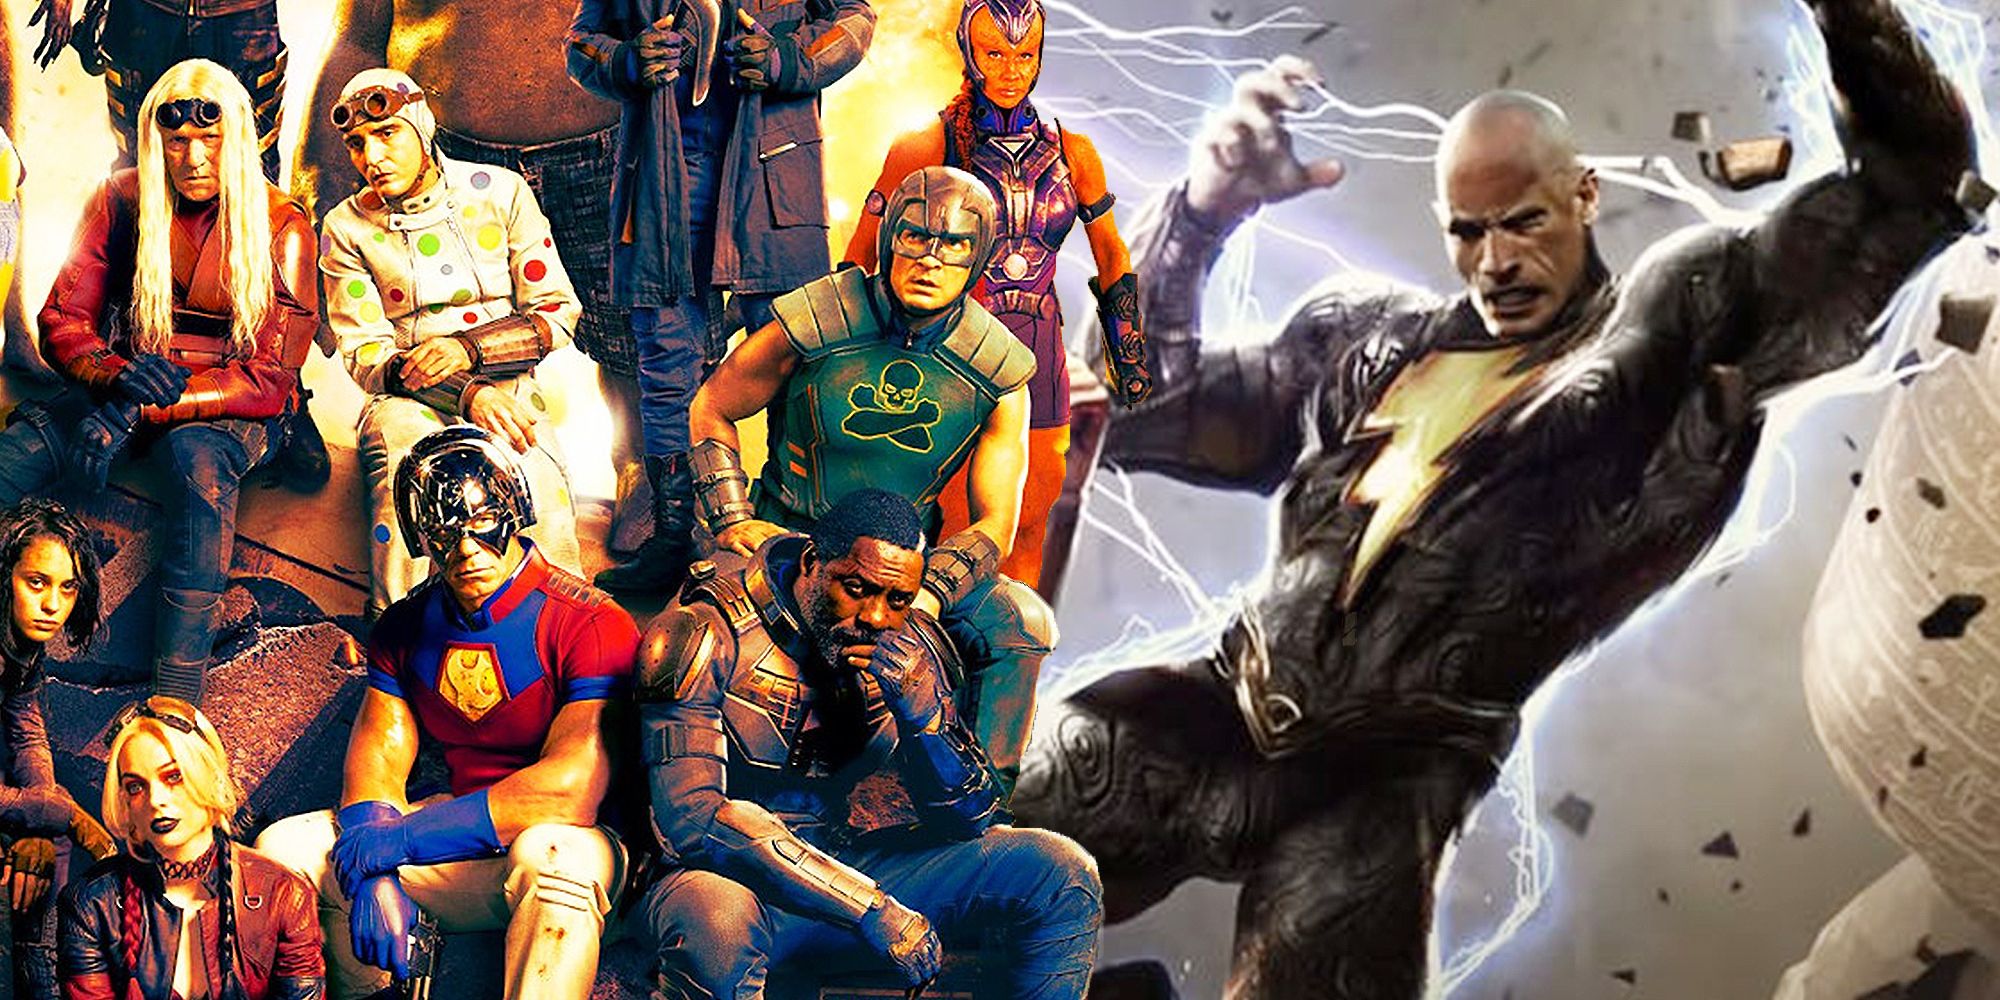 The Suicide Squad's New Task Force X and Dwayne Johnson's Black Adam